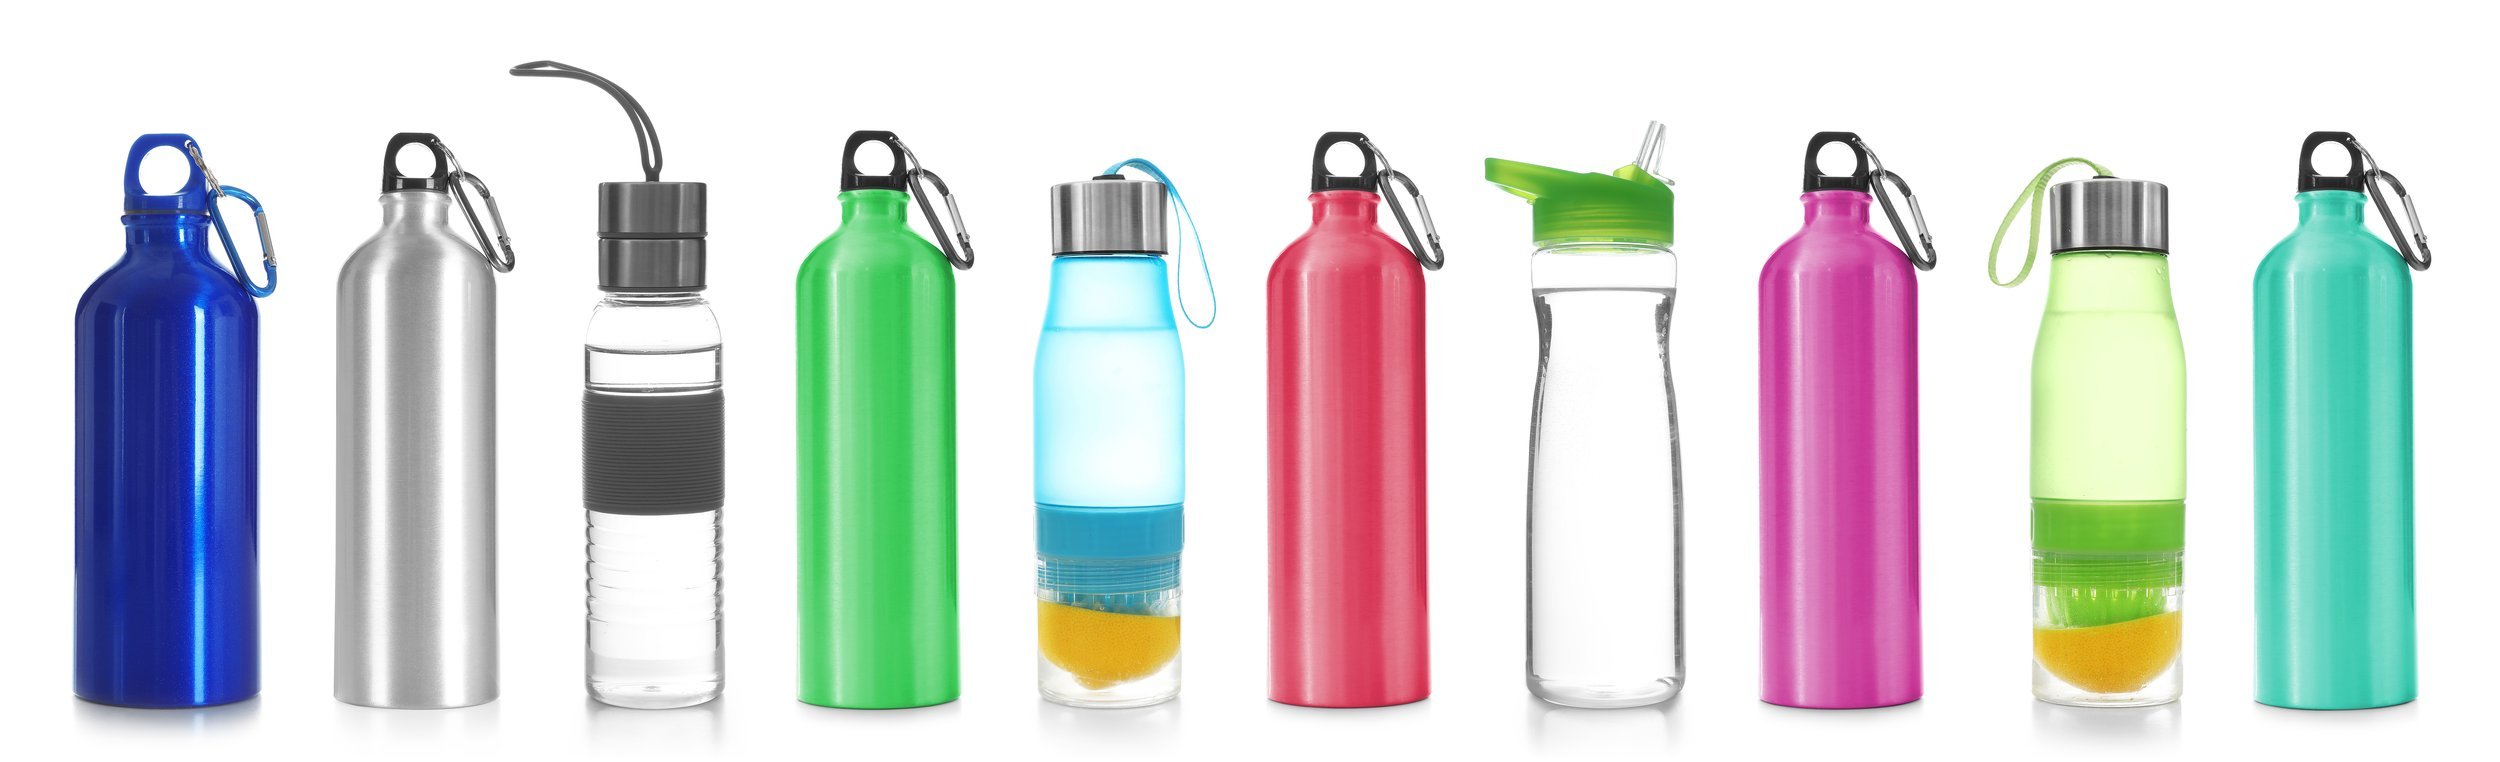 safefood  How to keep water bottles clean and bacteria free